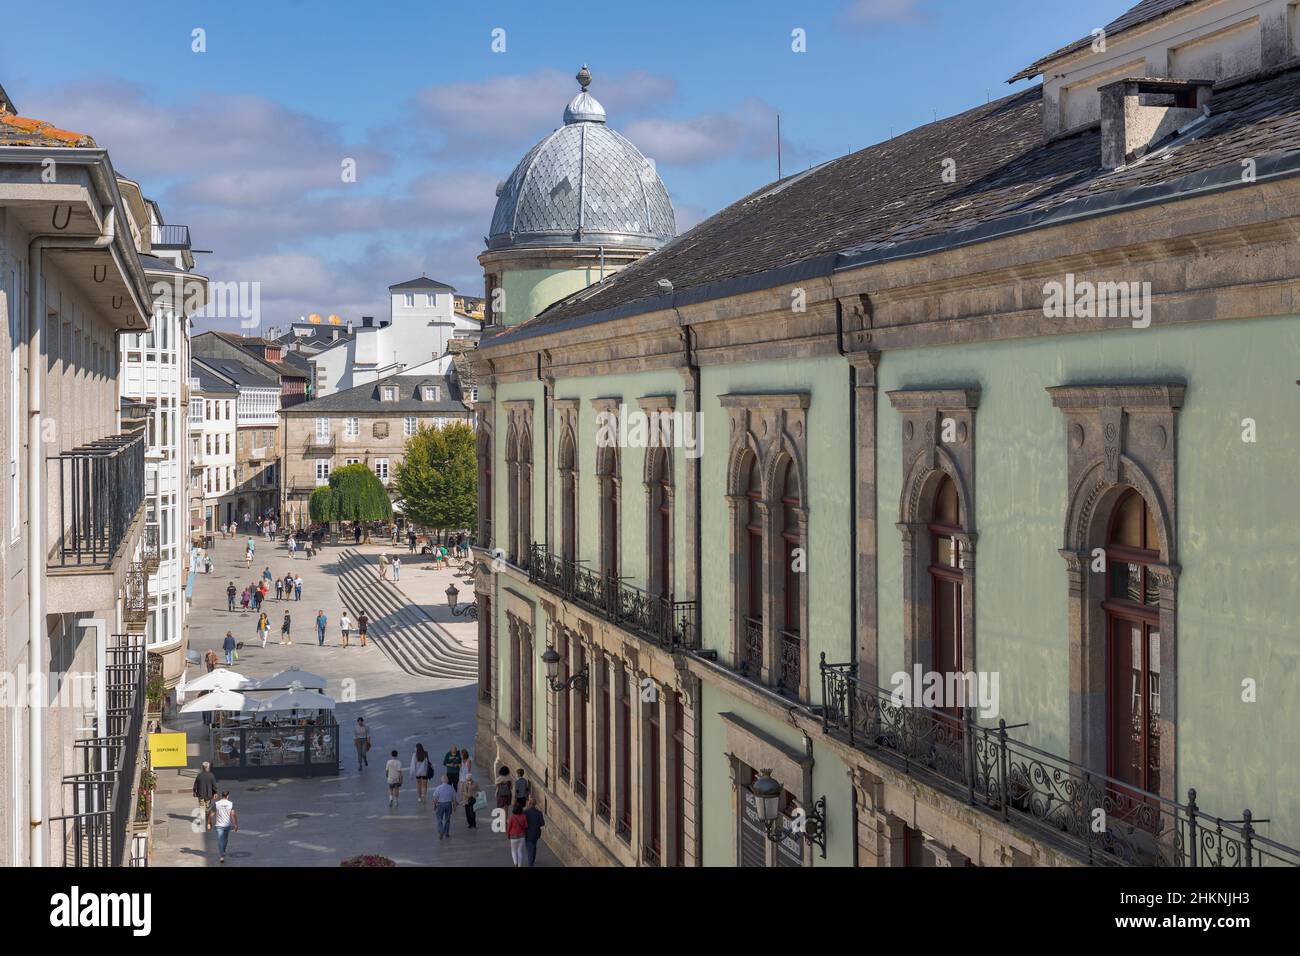 LUGO - SPAIN, AUGUST 19, 2021: View of Circulo de las Artes, a Modernist Building currently devoted to the promotion and of cultural events, on August Stock Photo